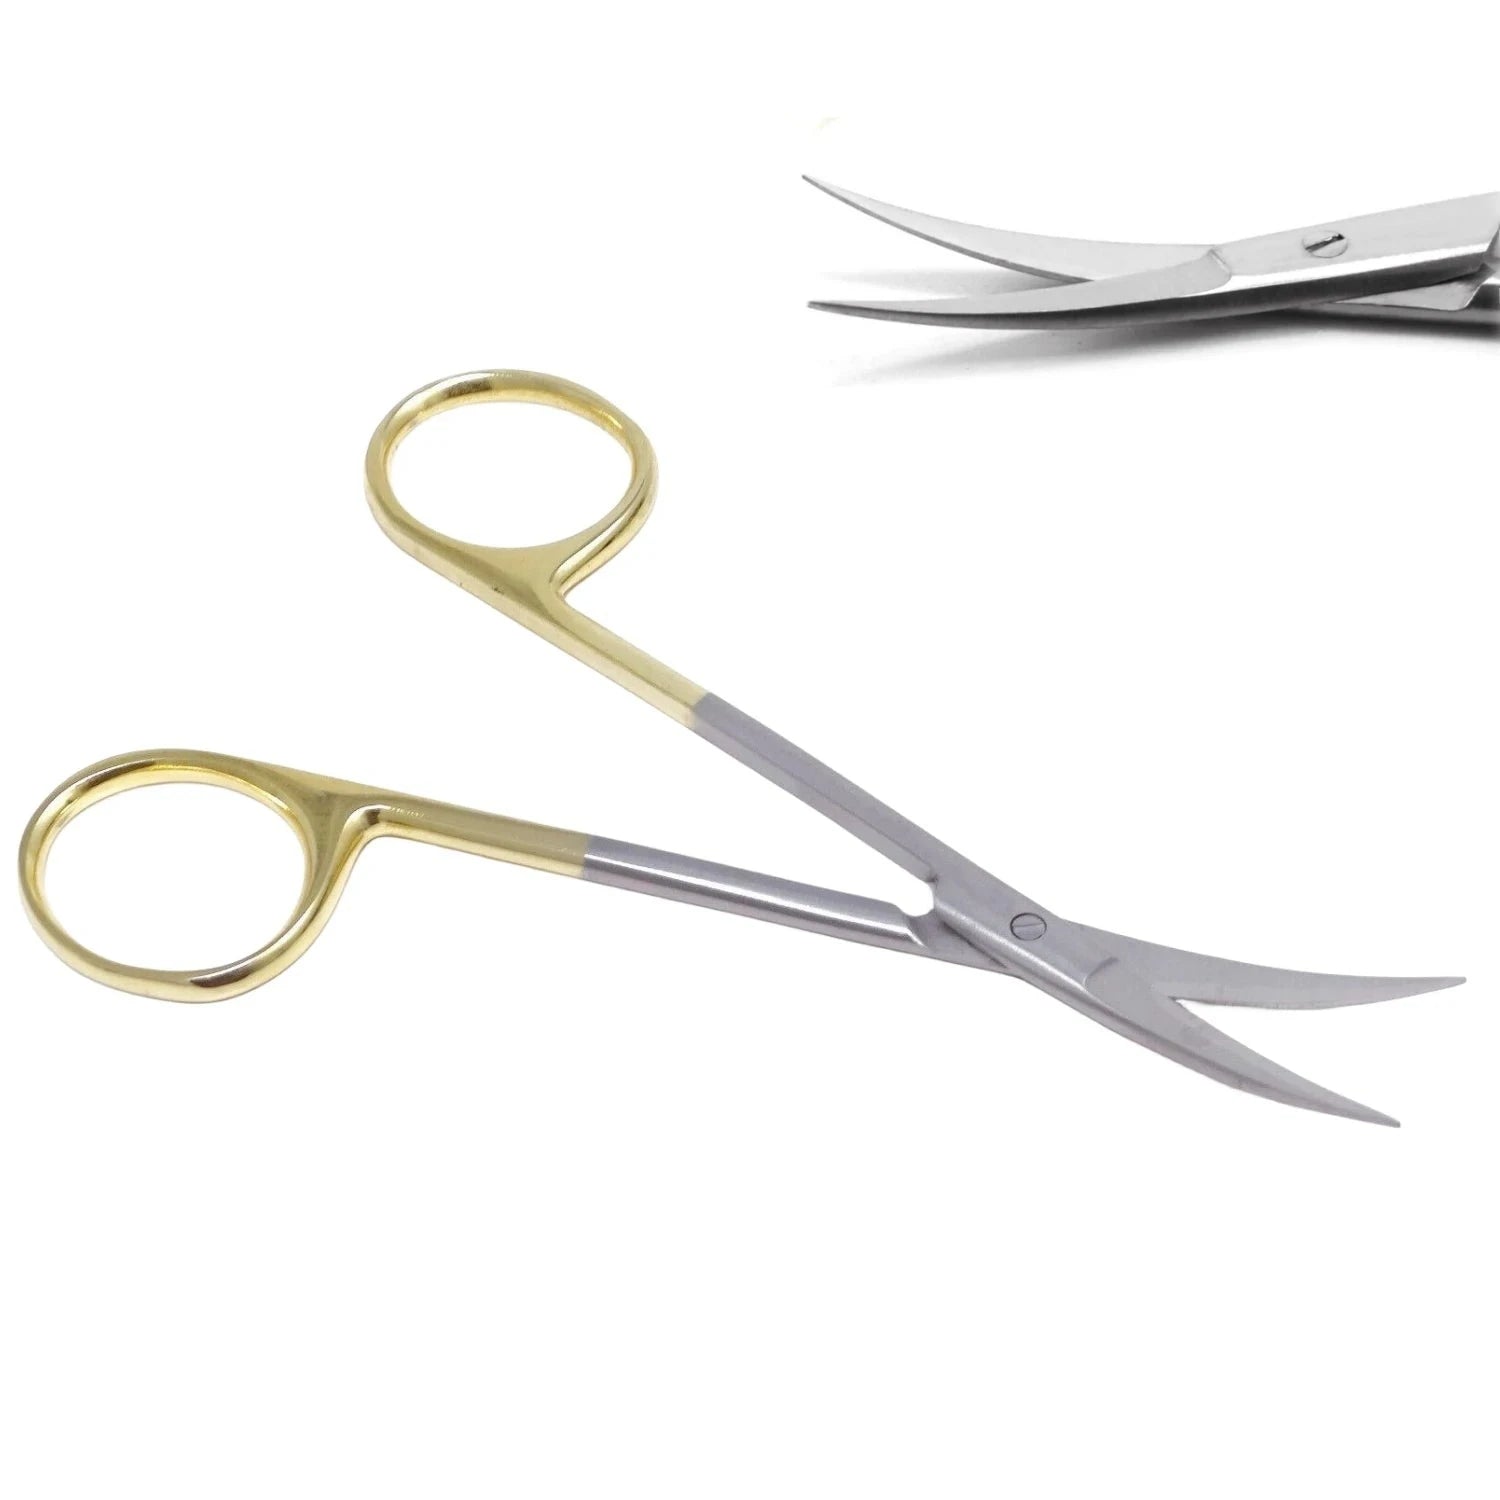  surgical scissors curved & straight